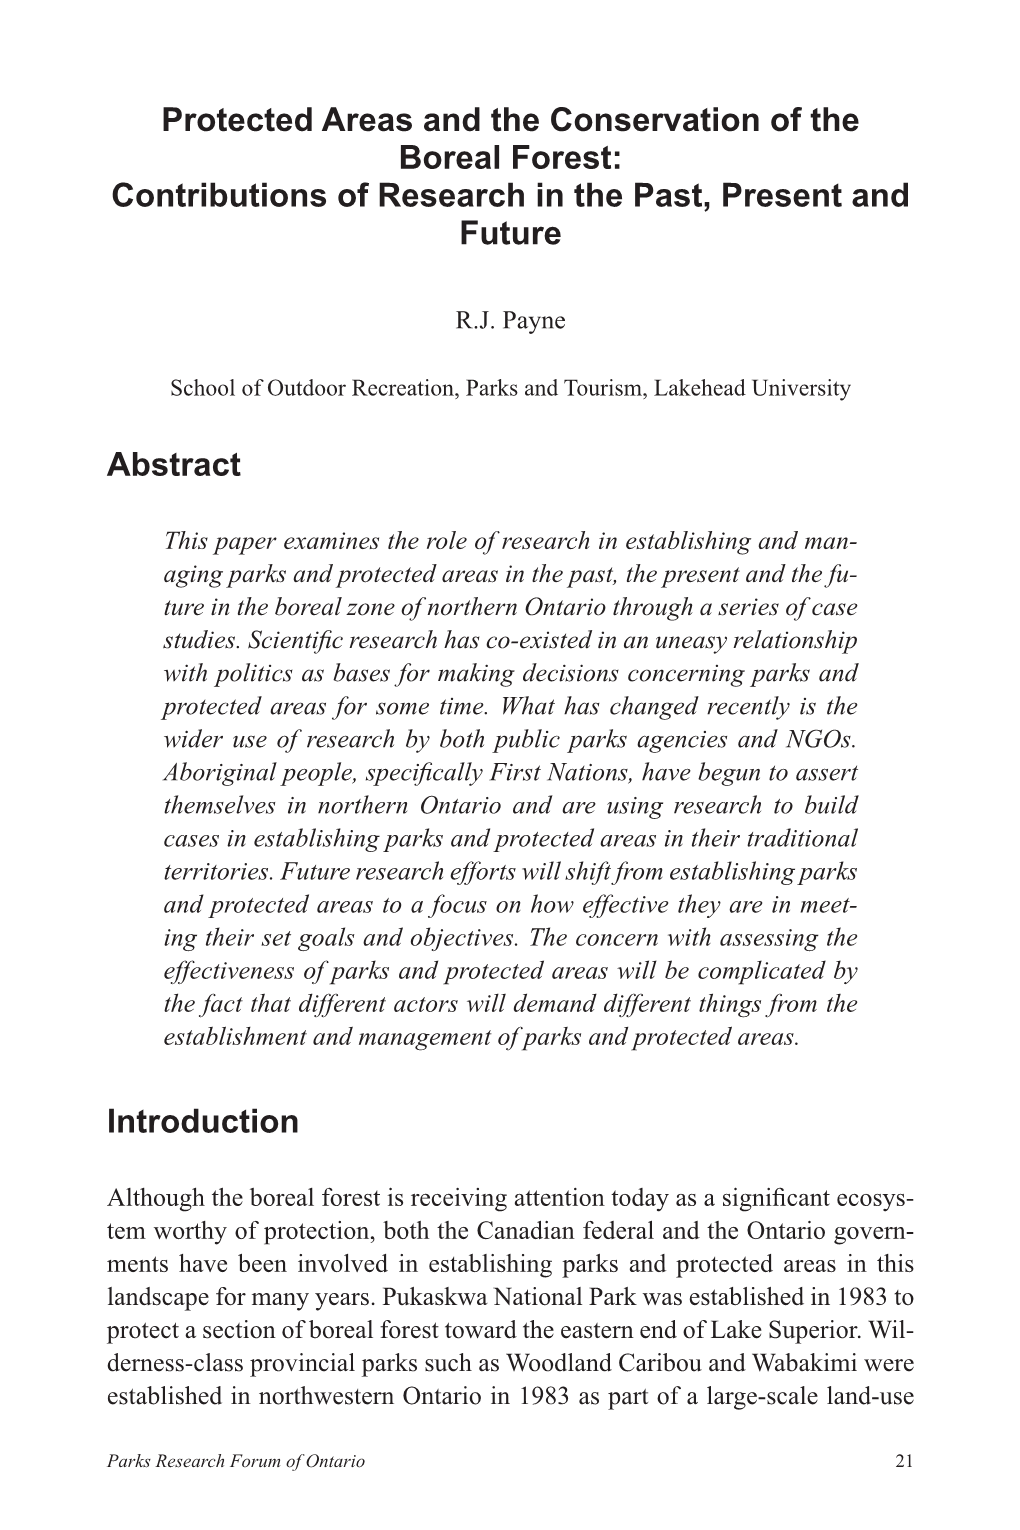 Protected Areas and the Conservation of the Boreal Forest: Contributions of Research in the Past, Present and Future